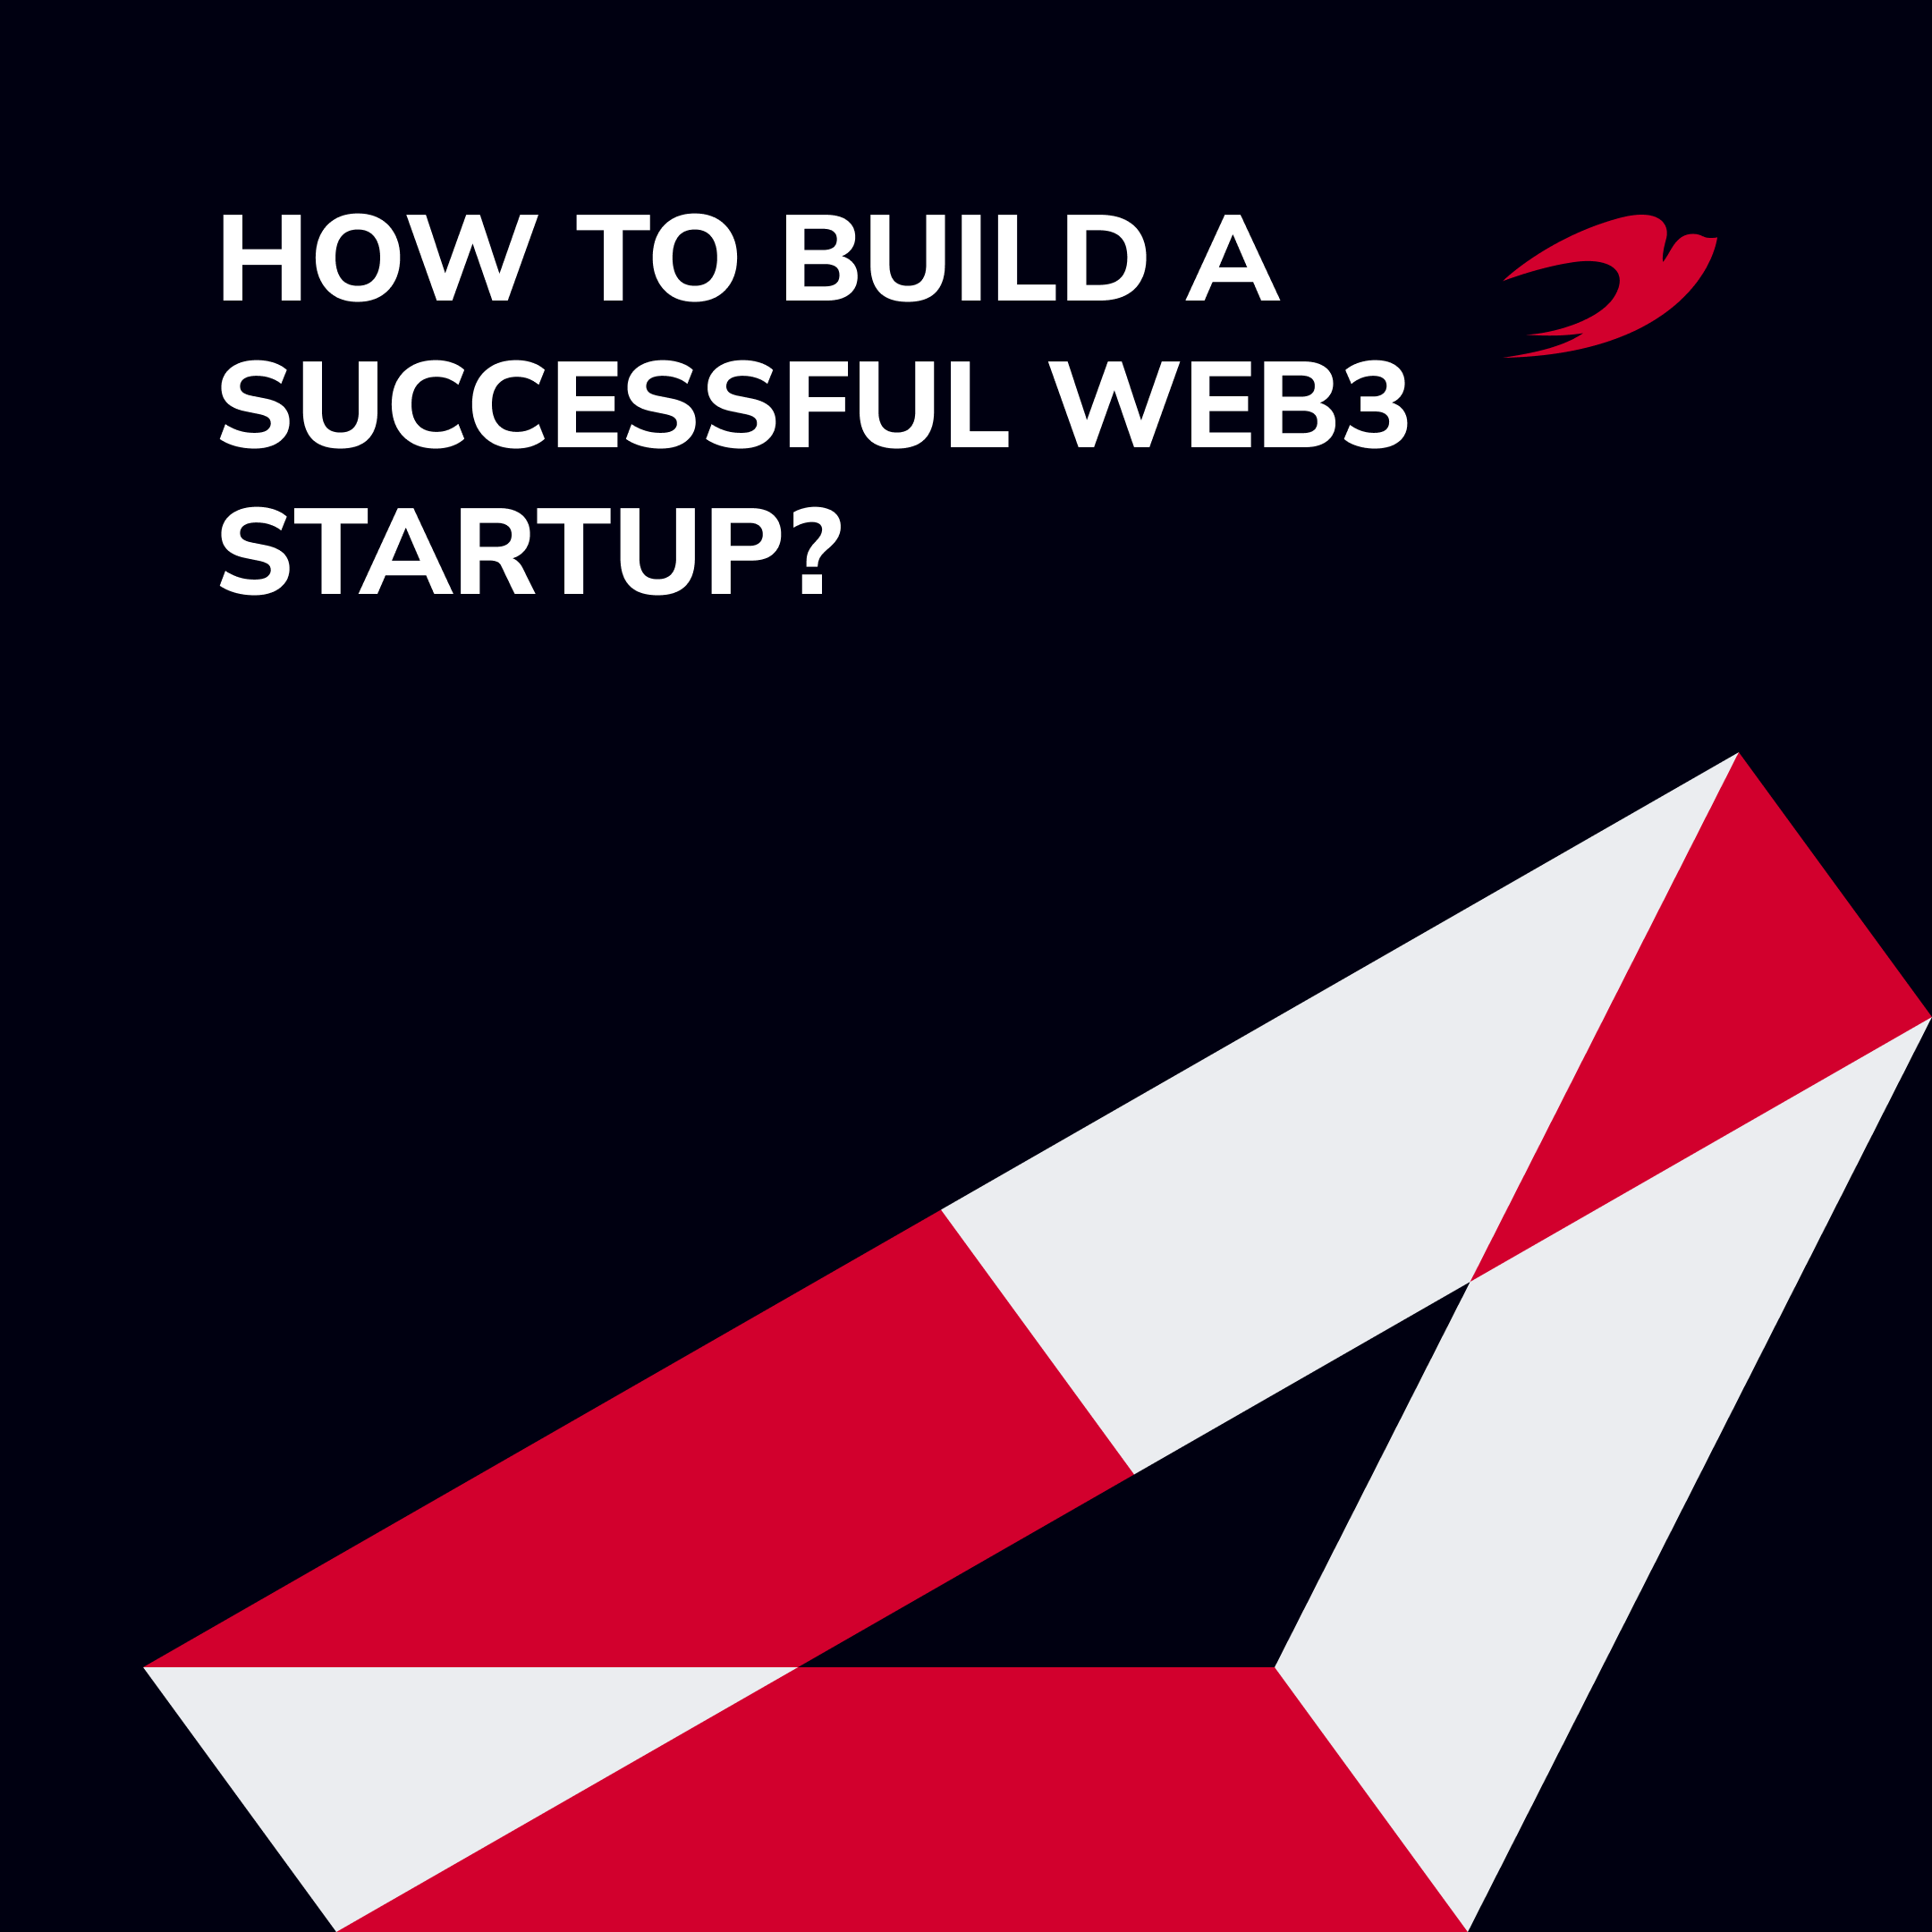 How to Build a Successful Web3 Startup